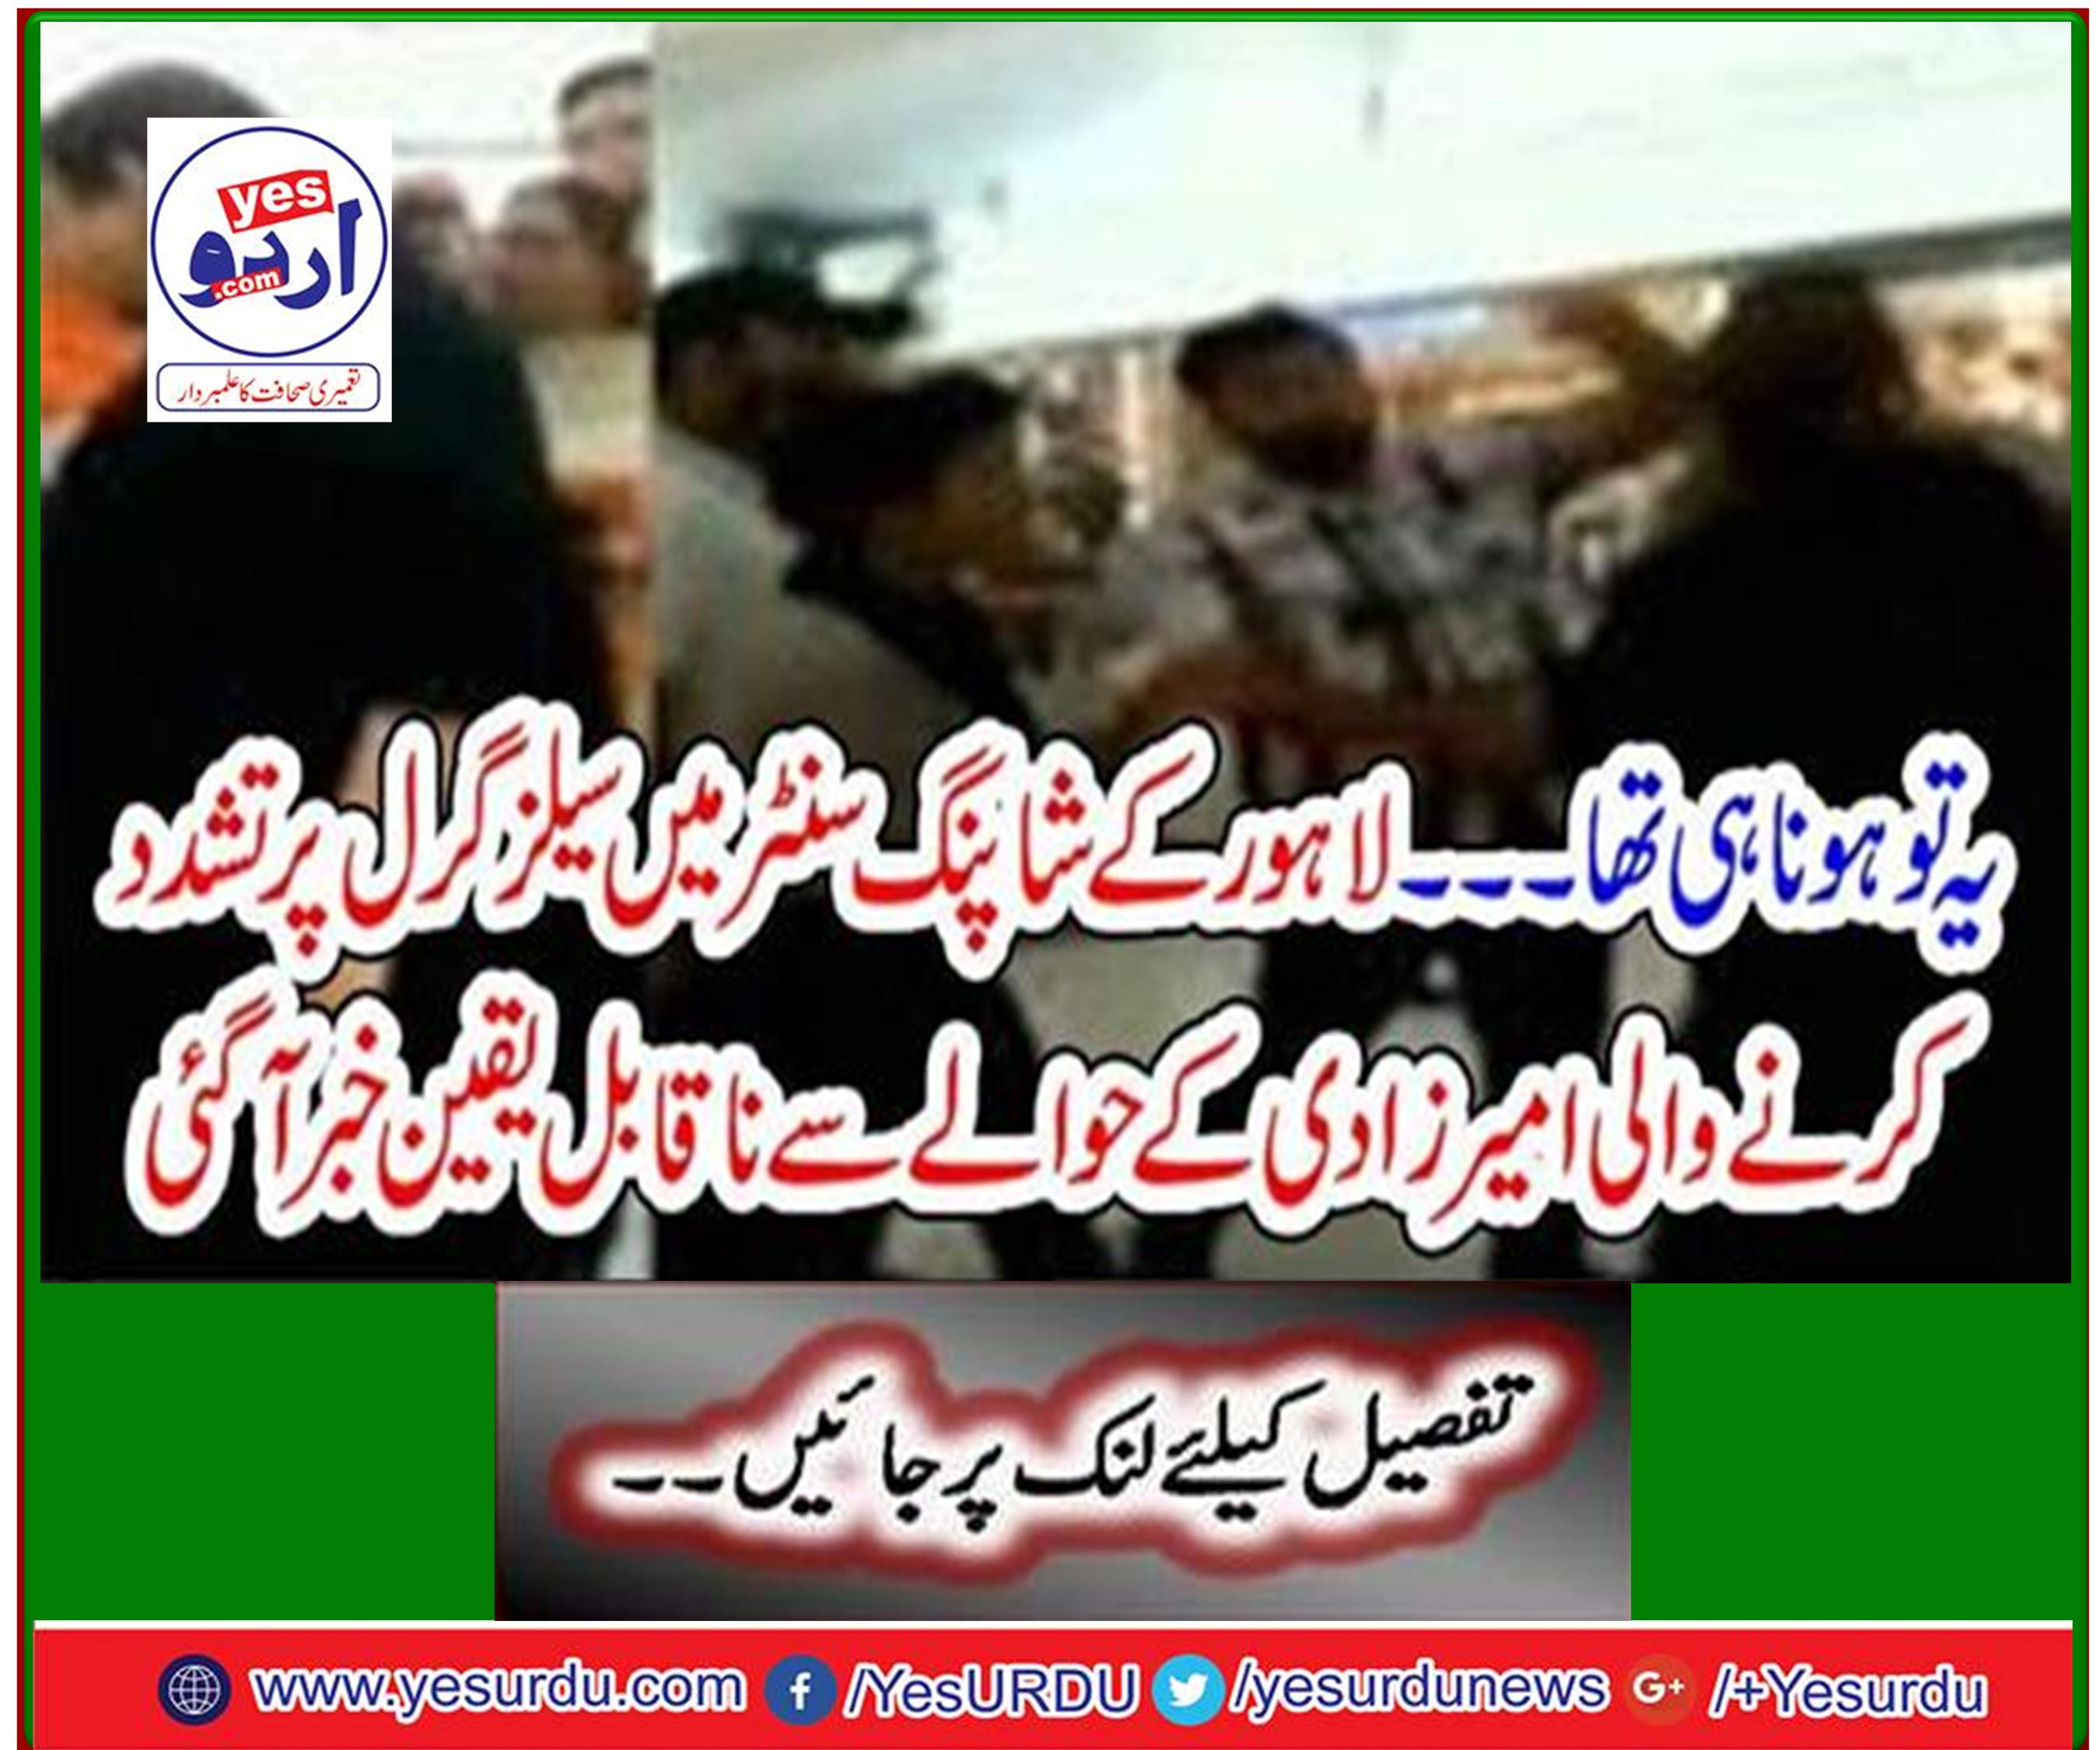 It was meant to be ... Unbelievable news about Amir Zadhi torturing sales girl in Lahore shopping center